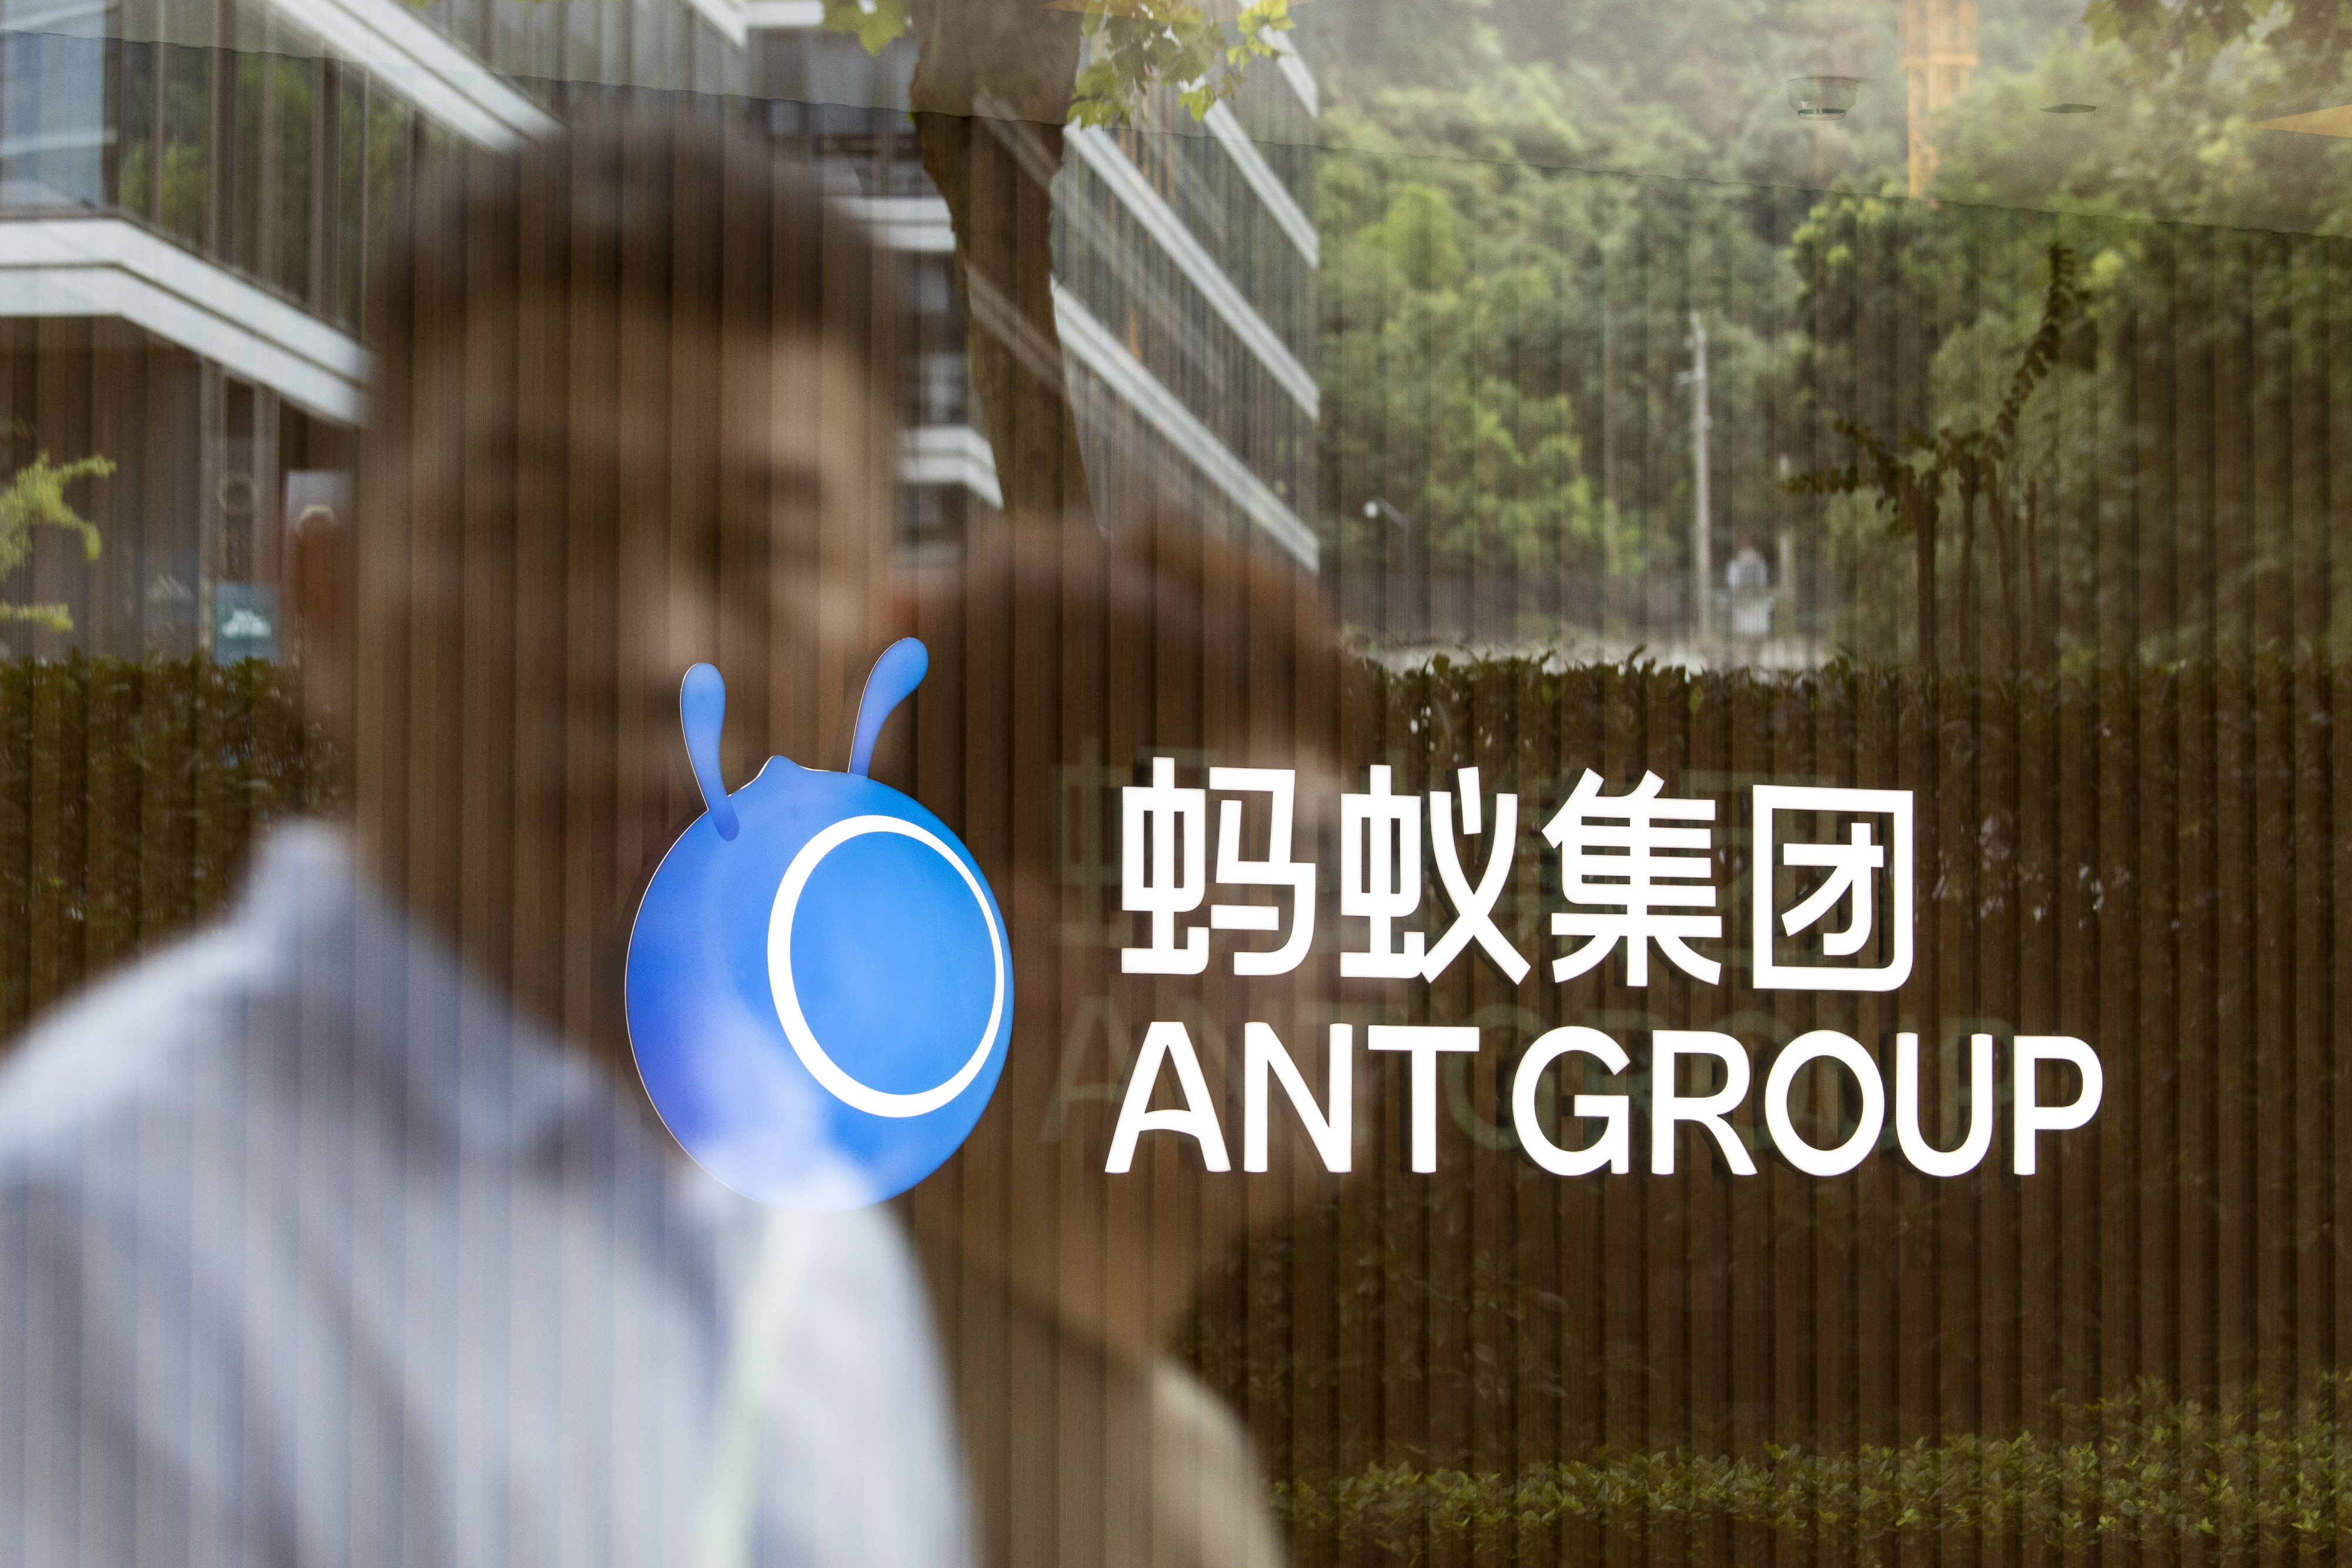 The Ant Group logo is displayed at the company’s headquarters in Hangzhou, China, Aug. 2, 2021. Photo: Bloomberg